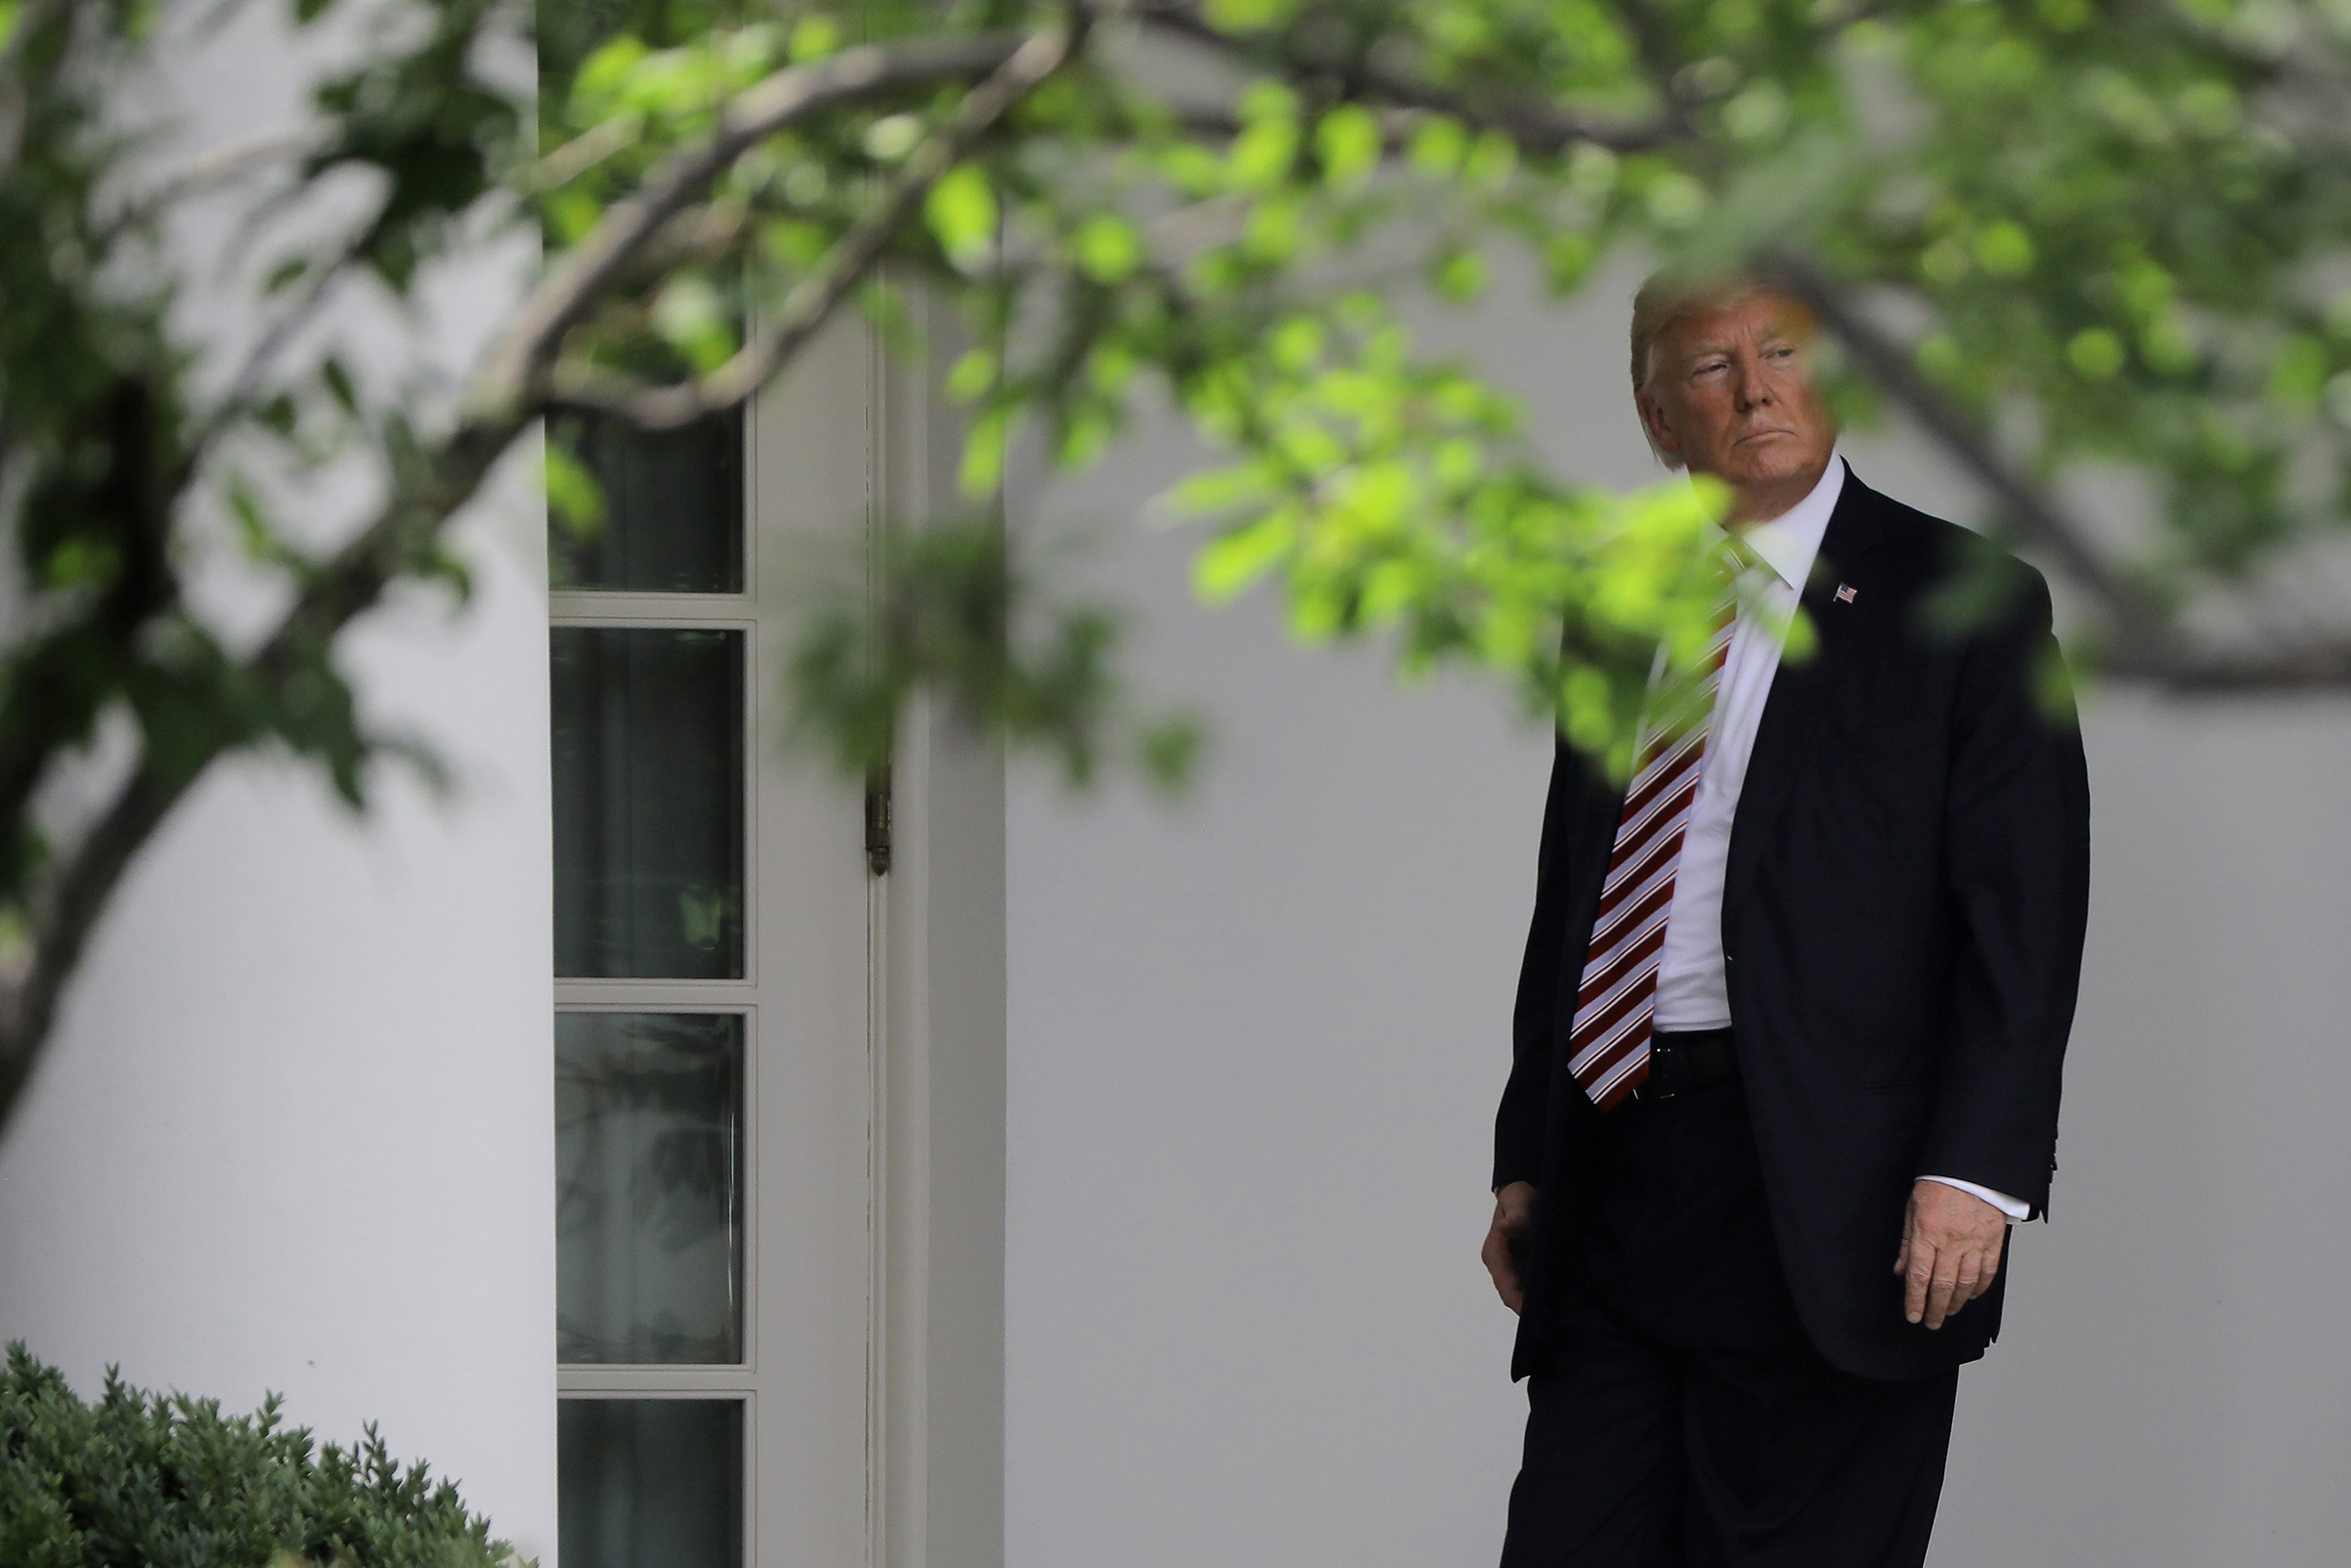 Trump at the White House June 12. (Carlos Barria—Reuters)